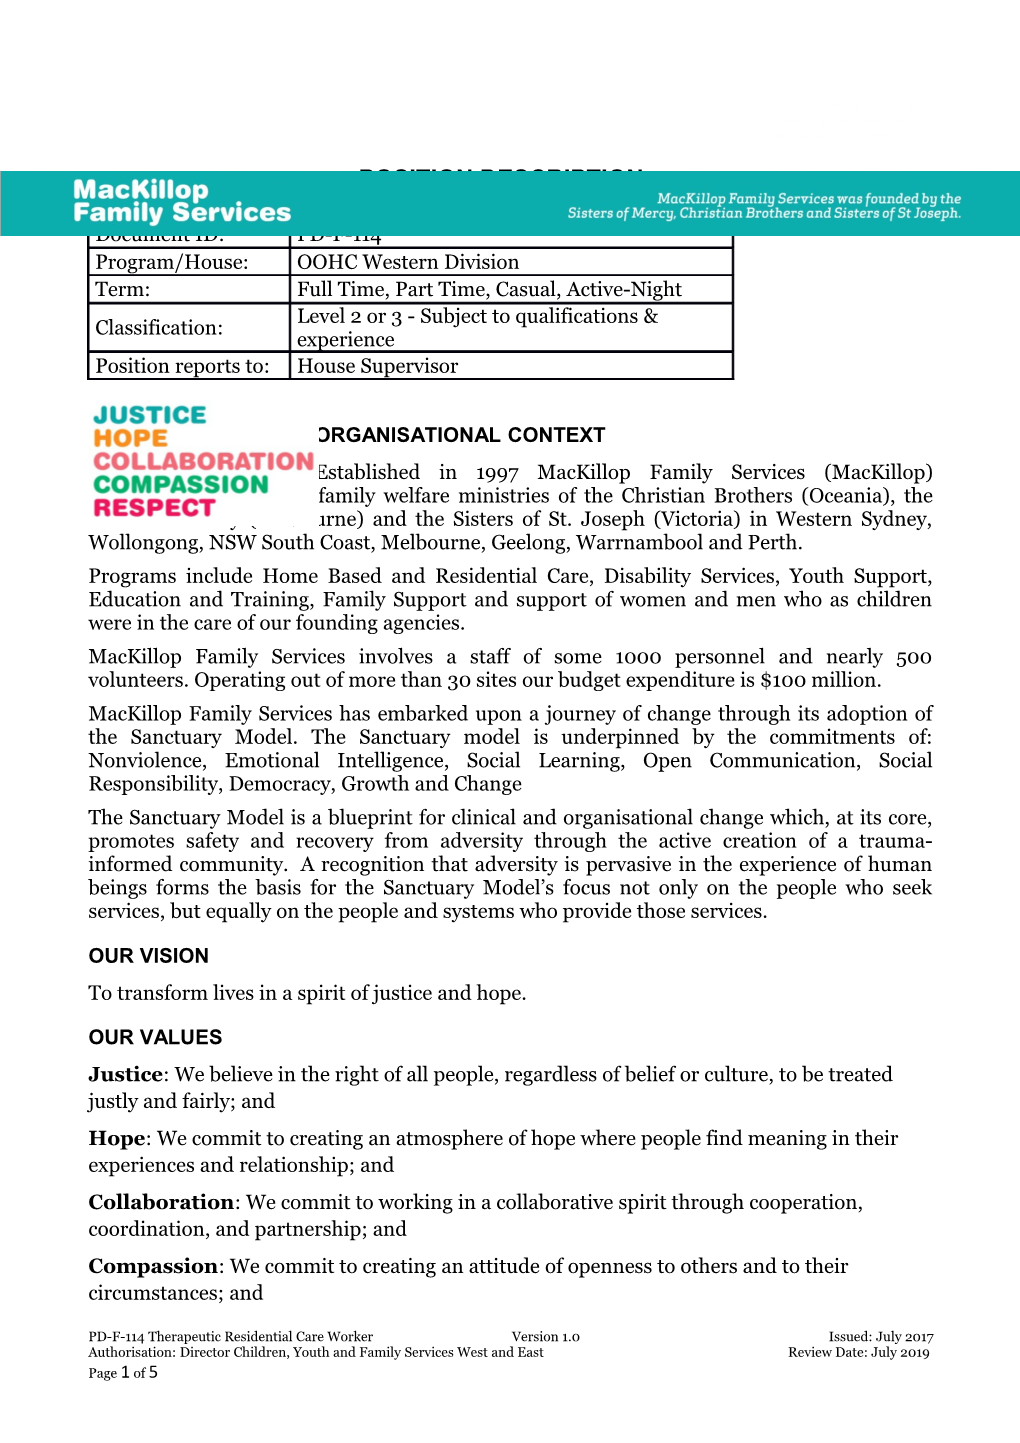 PD-F-114 Therapeutic Residential Care Worker Position Description